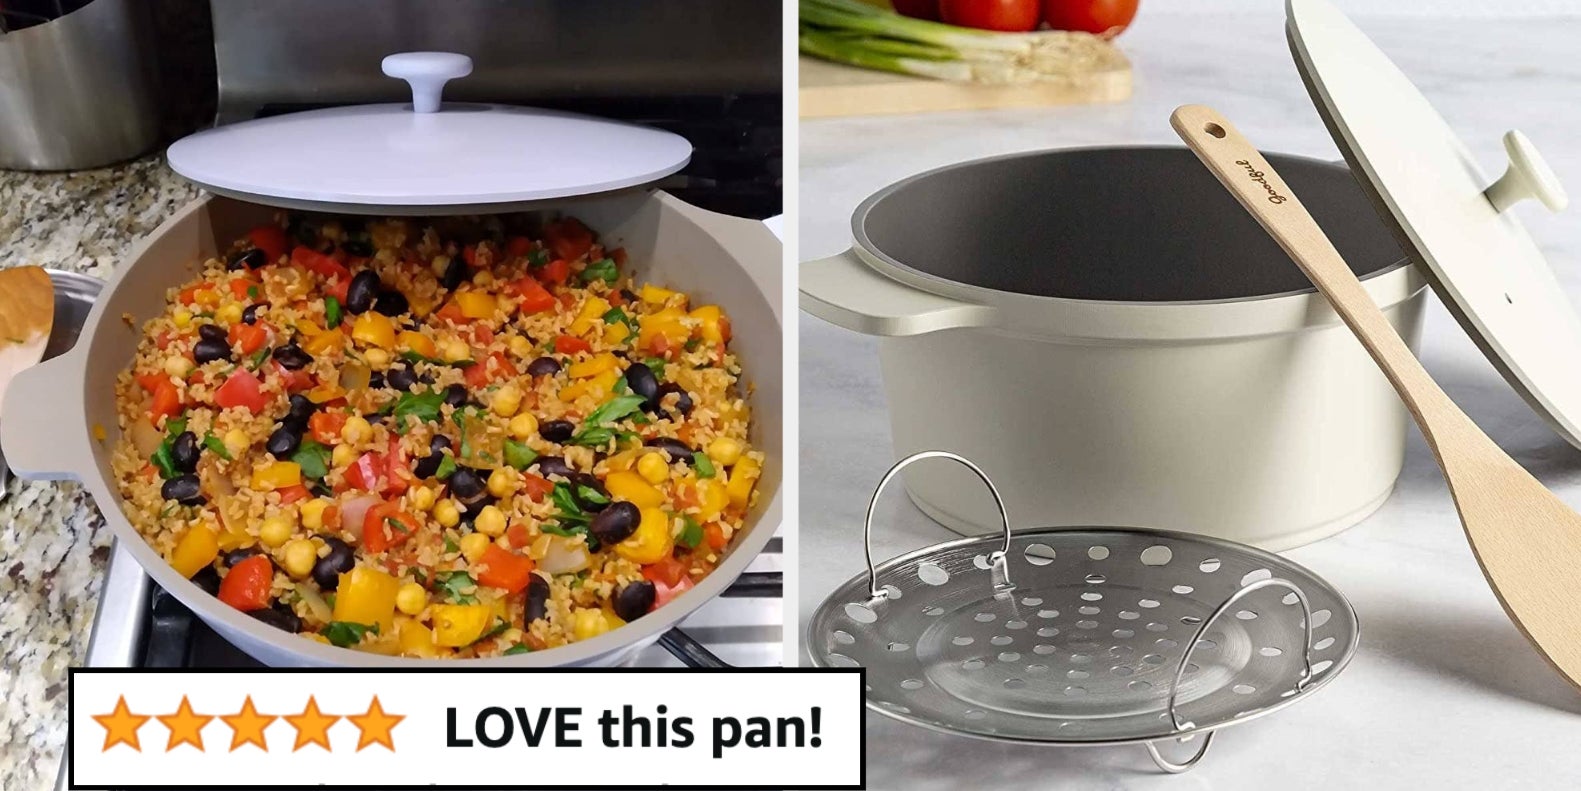 Goodful Is Offering 30% Off Their All-In-One Pot And Pan